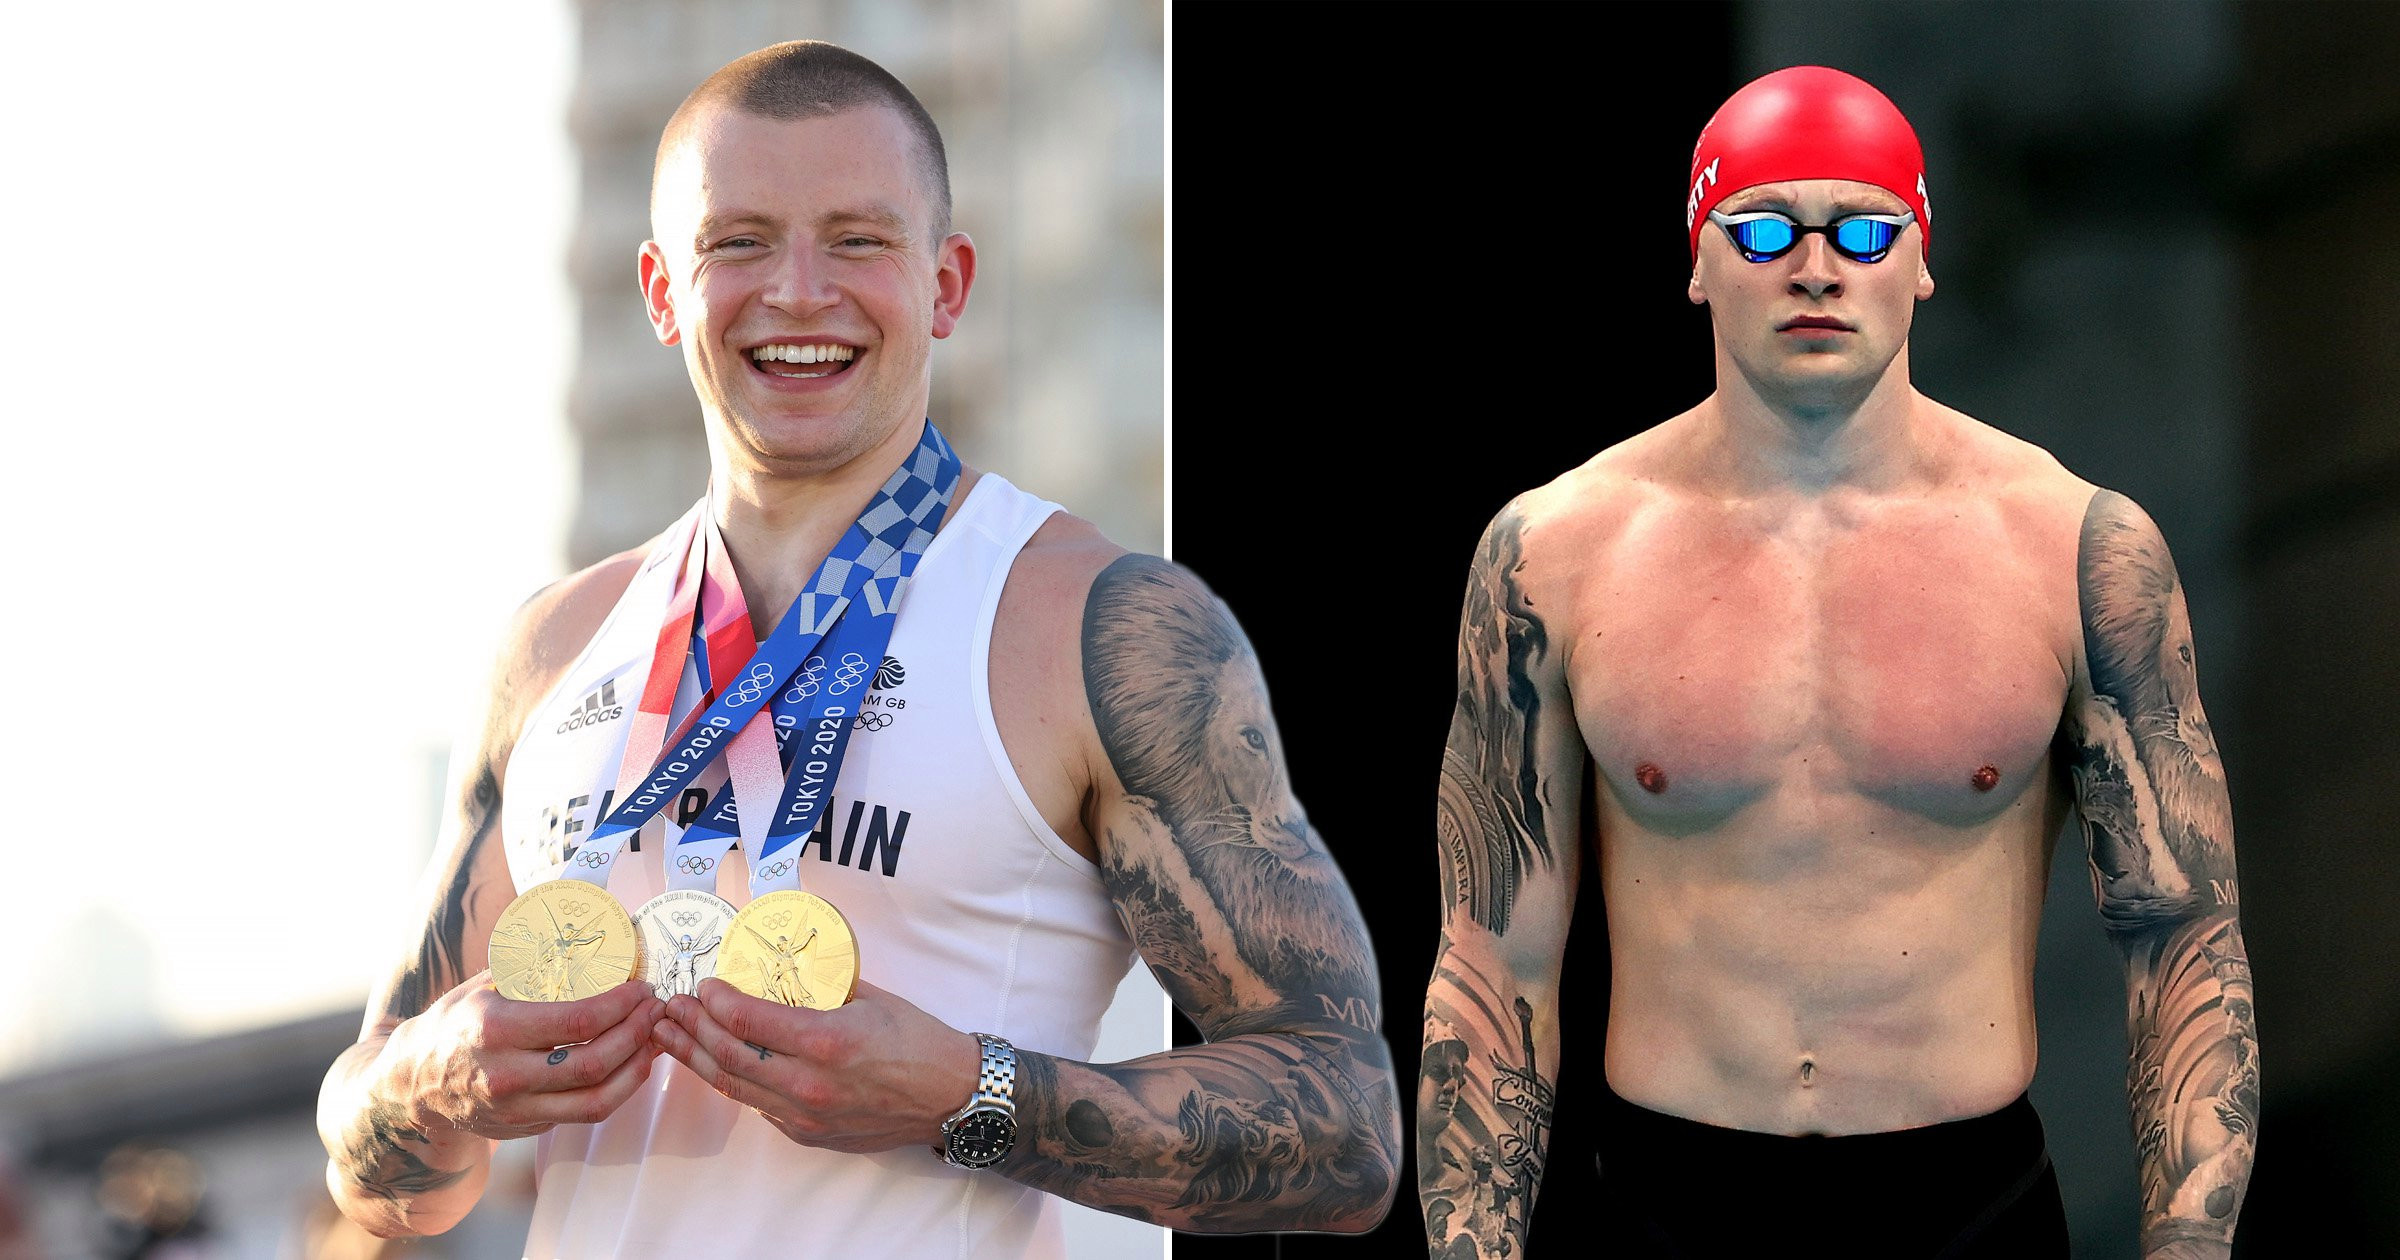 Strictly 2021: Who is Adam Peaty? Age, girlfriend and Olympic medals